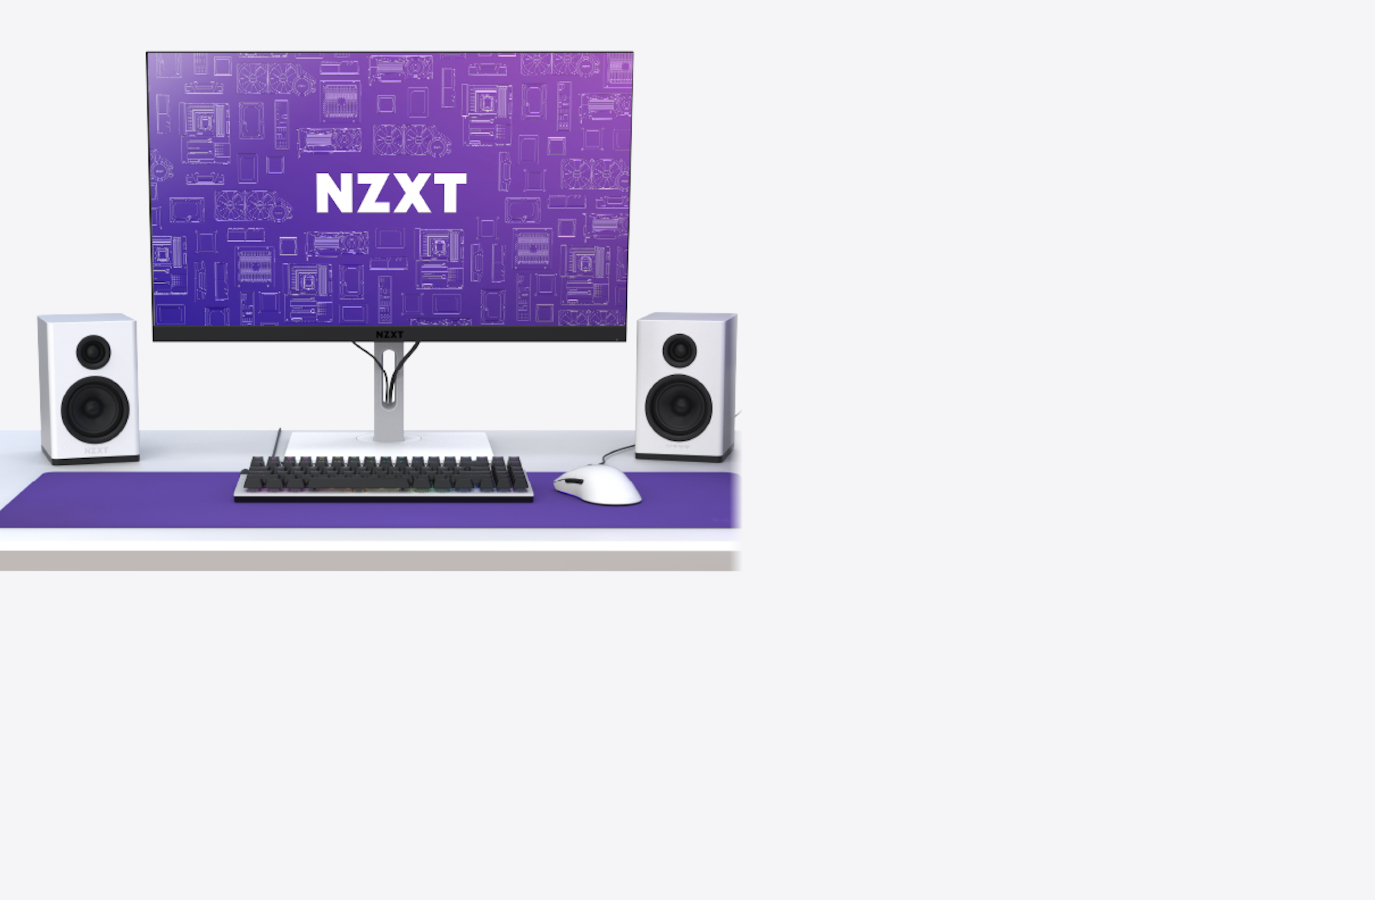 Relay Speakers within a full PC gaming desk setup including other NZXT products